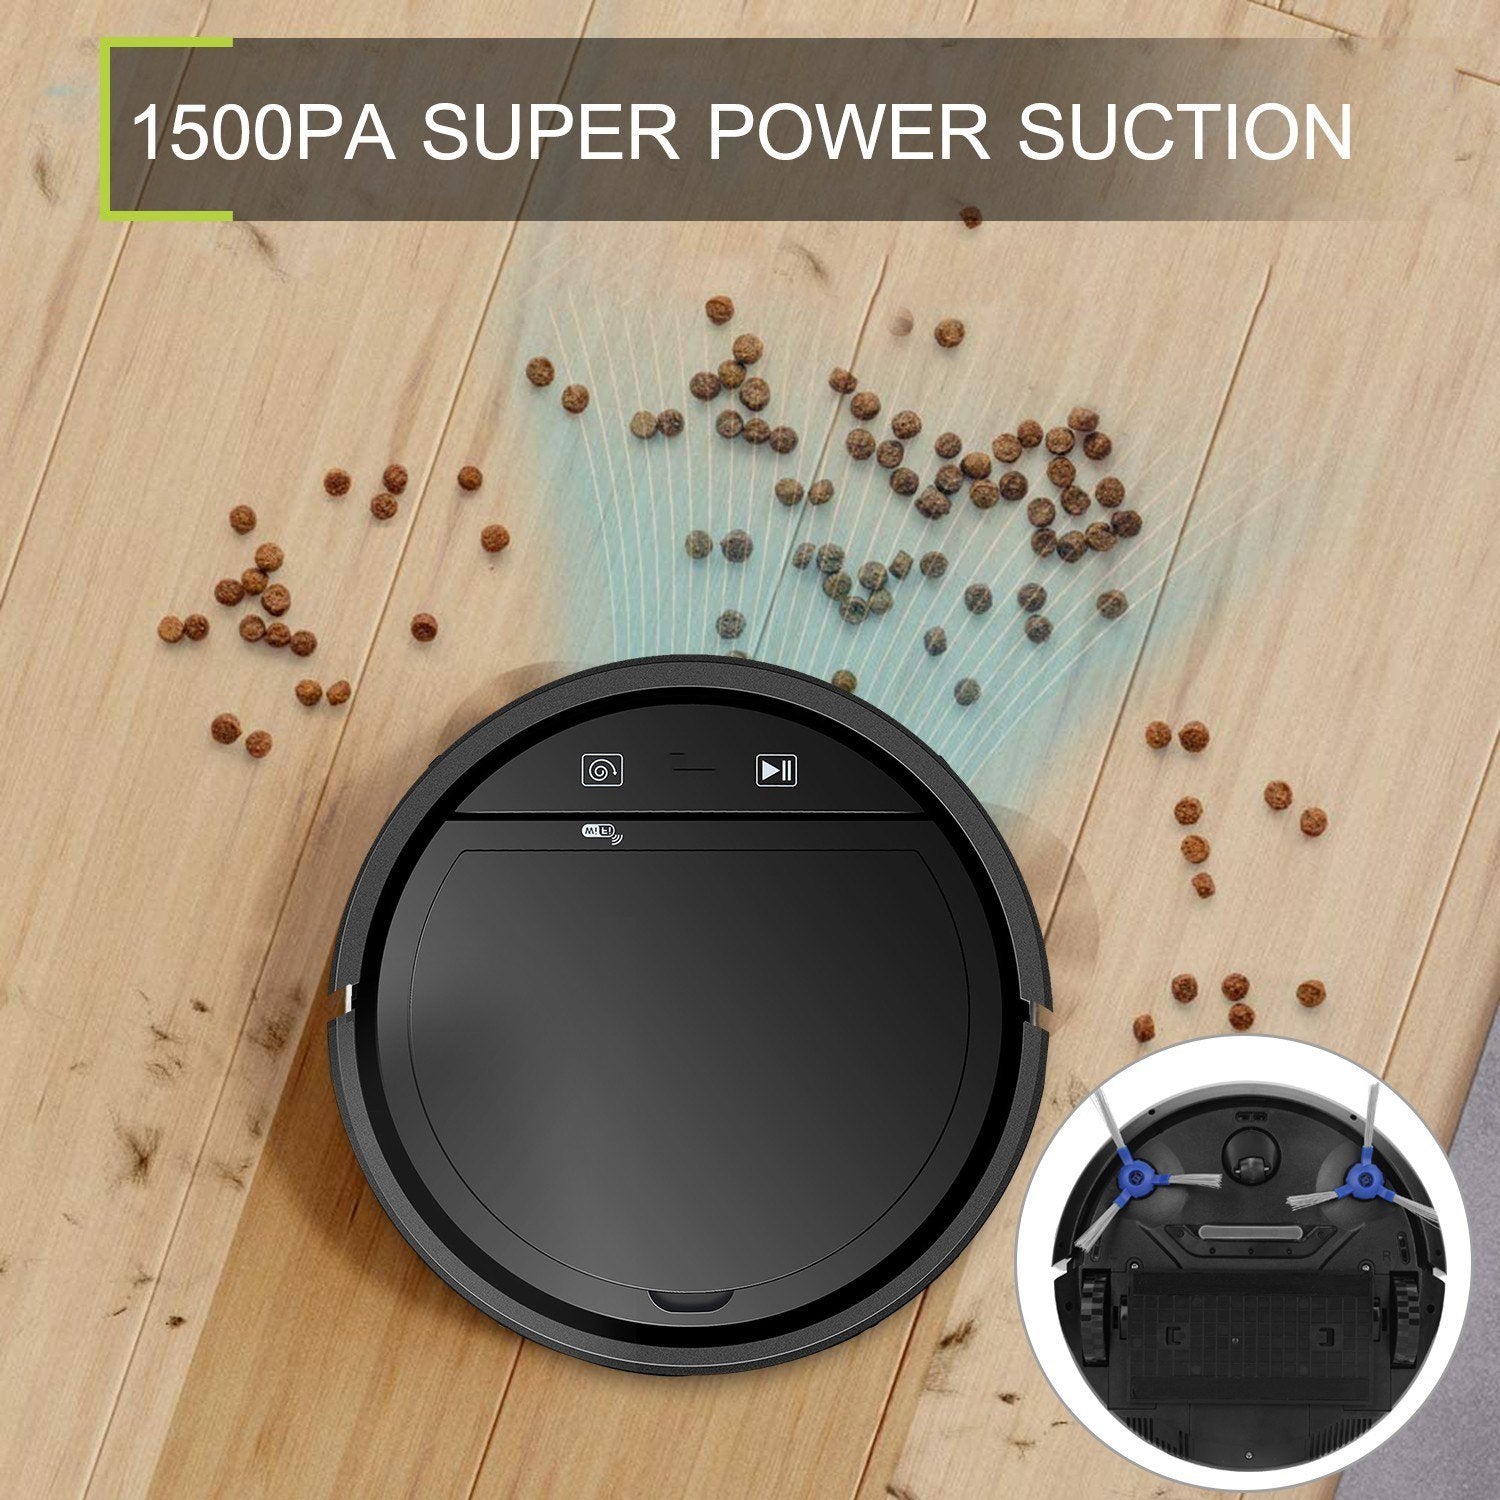 3-In-1 Robotic wifi Cleaner 1500Pa Powerful Suction Robot Vacuum Cleaner